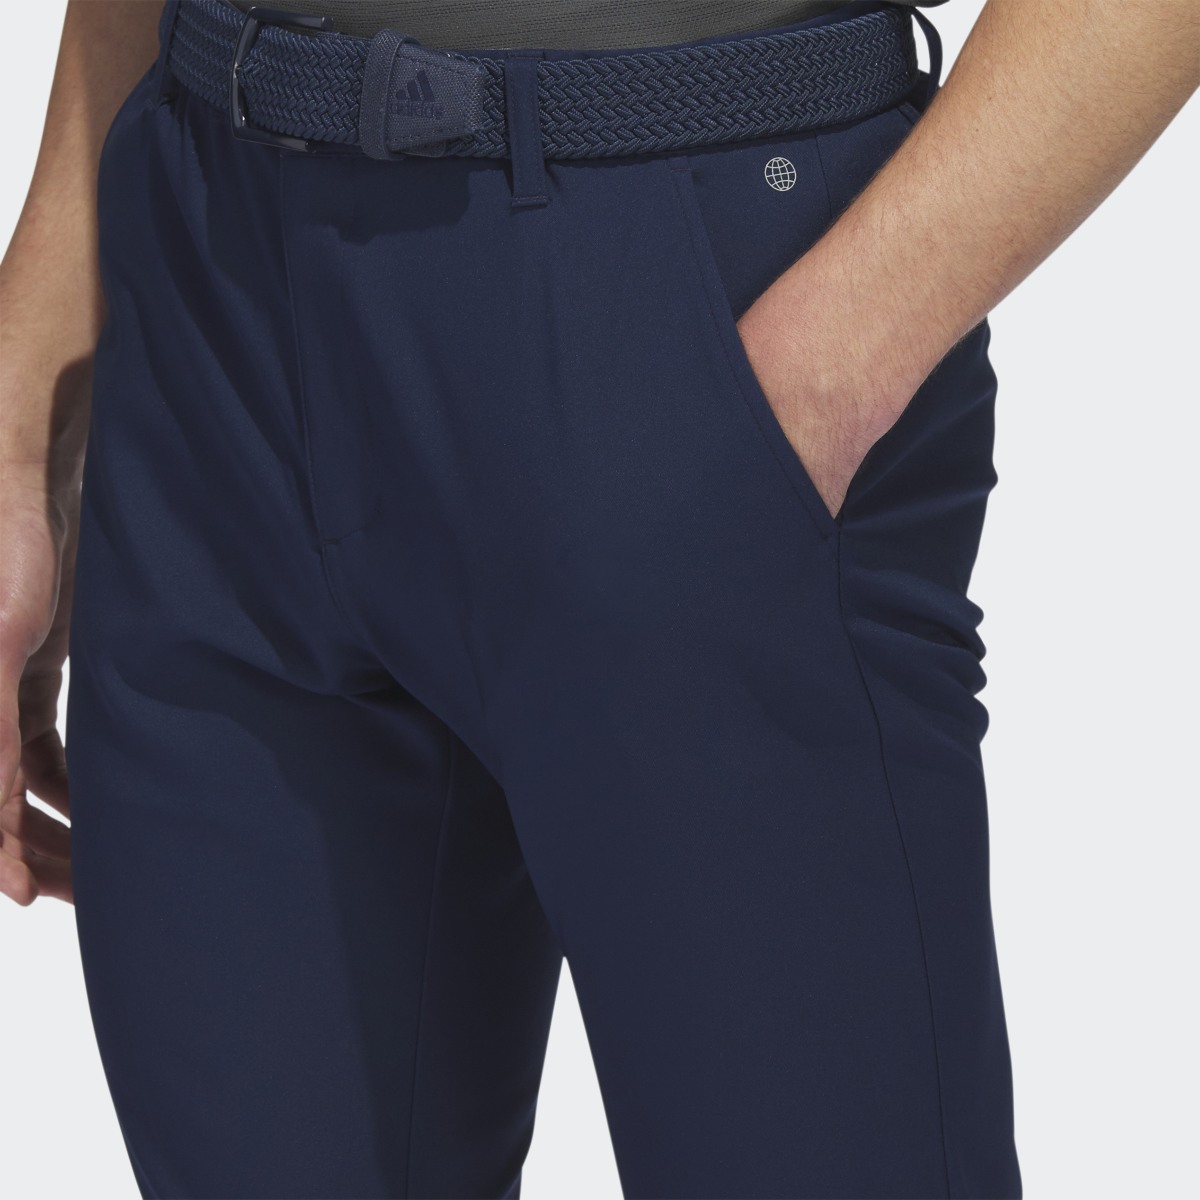 Adidas Ultimate365 Tapered Golf Pants. 5